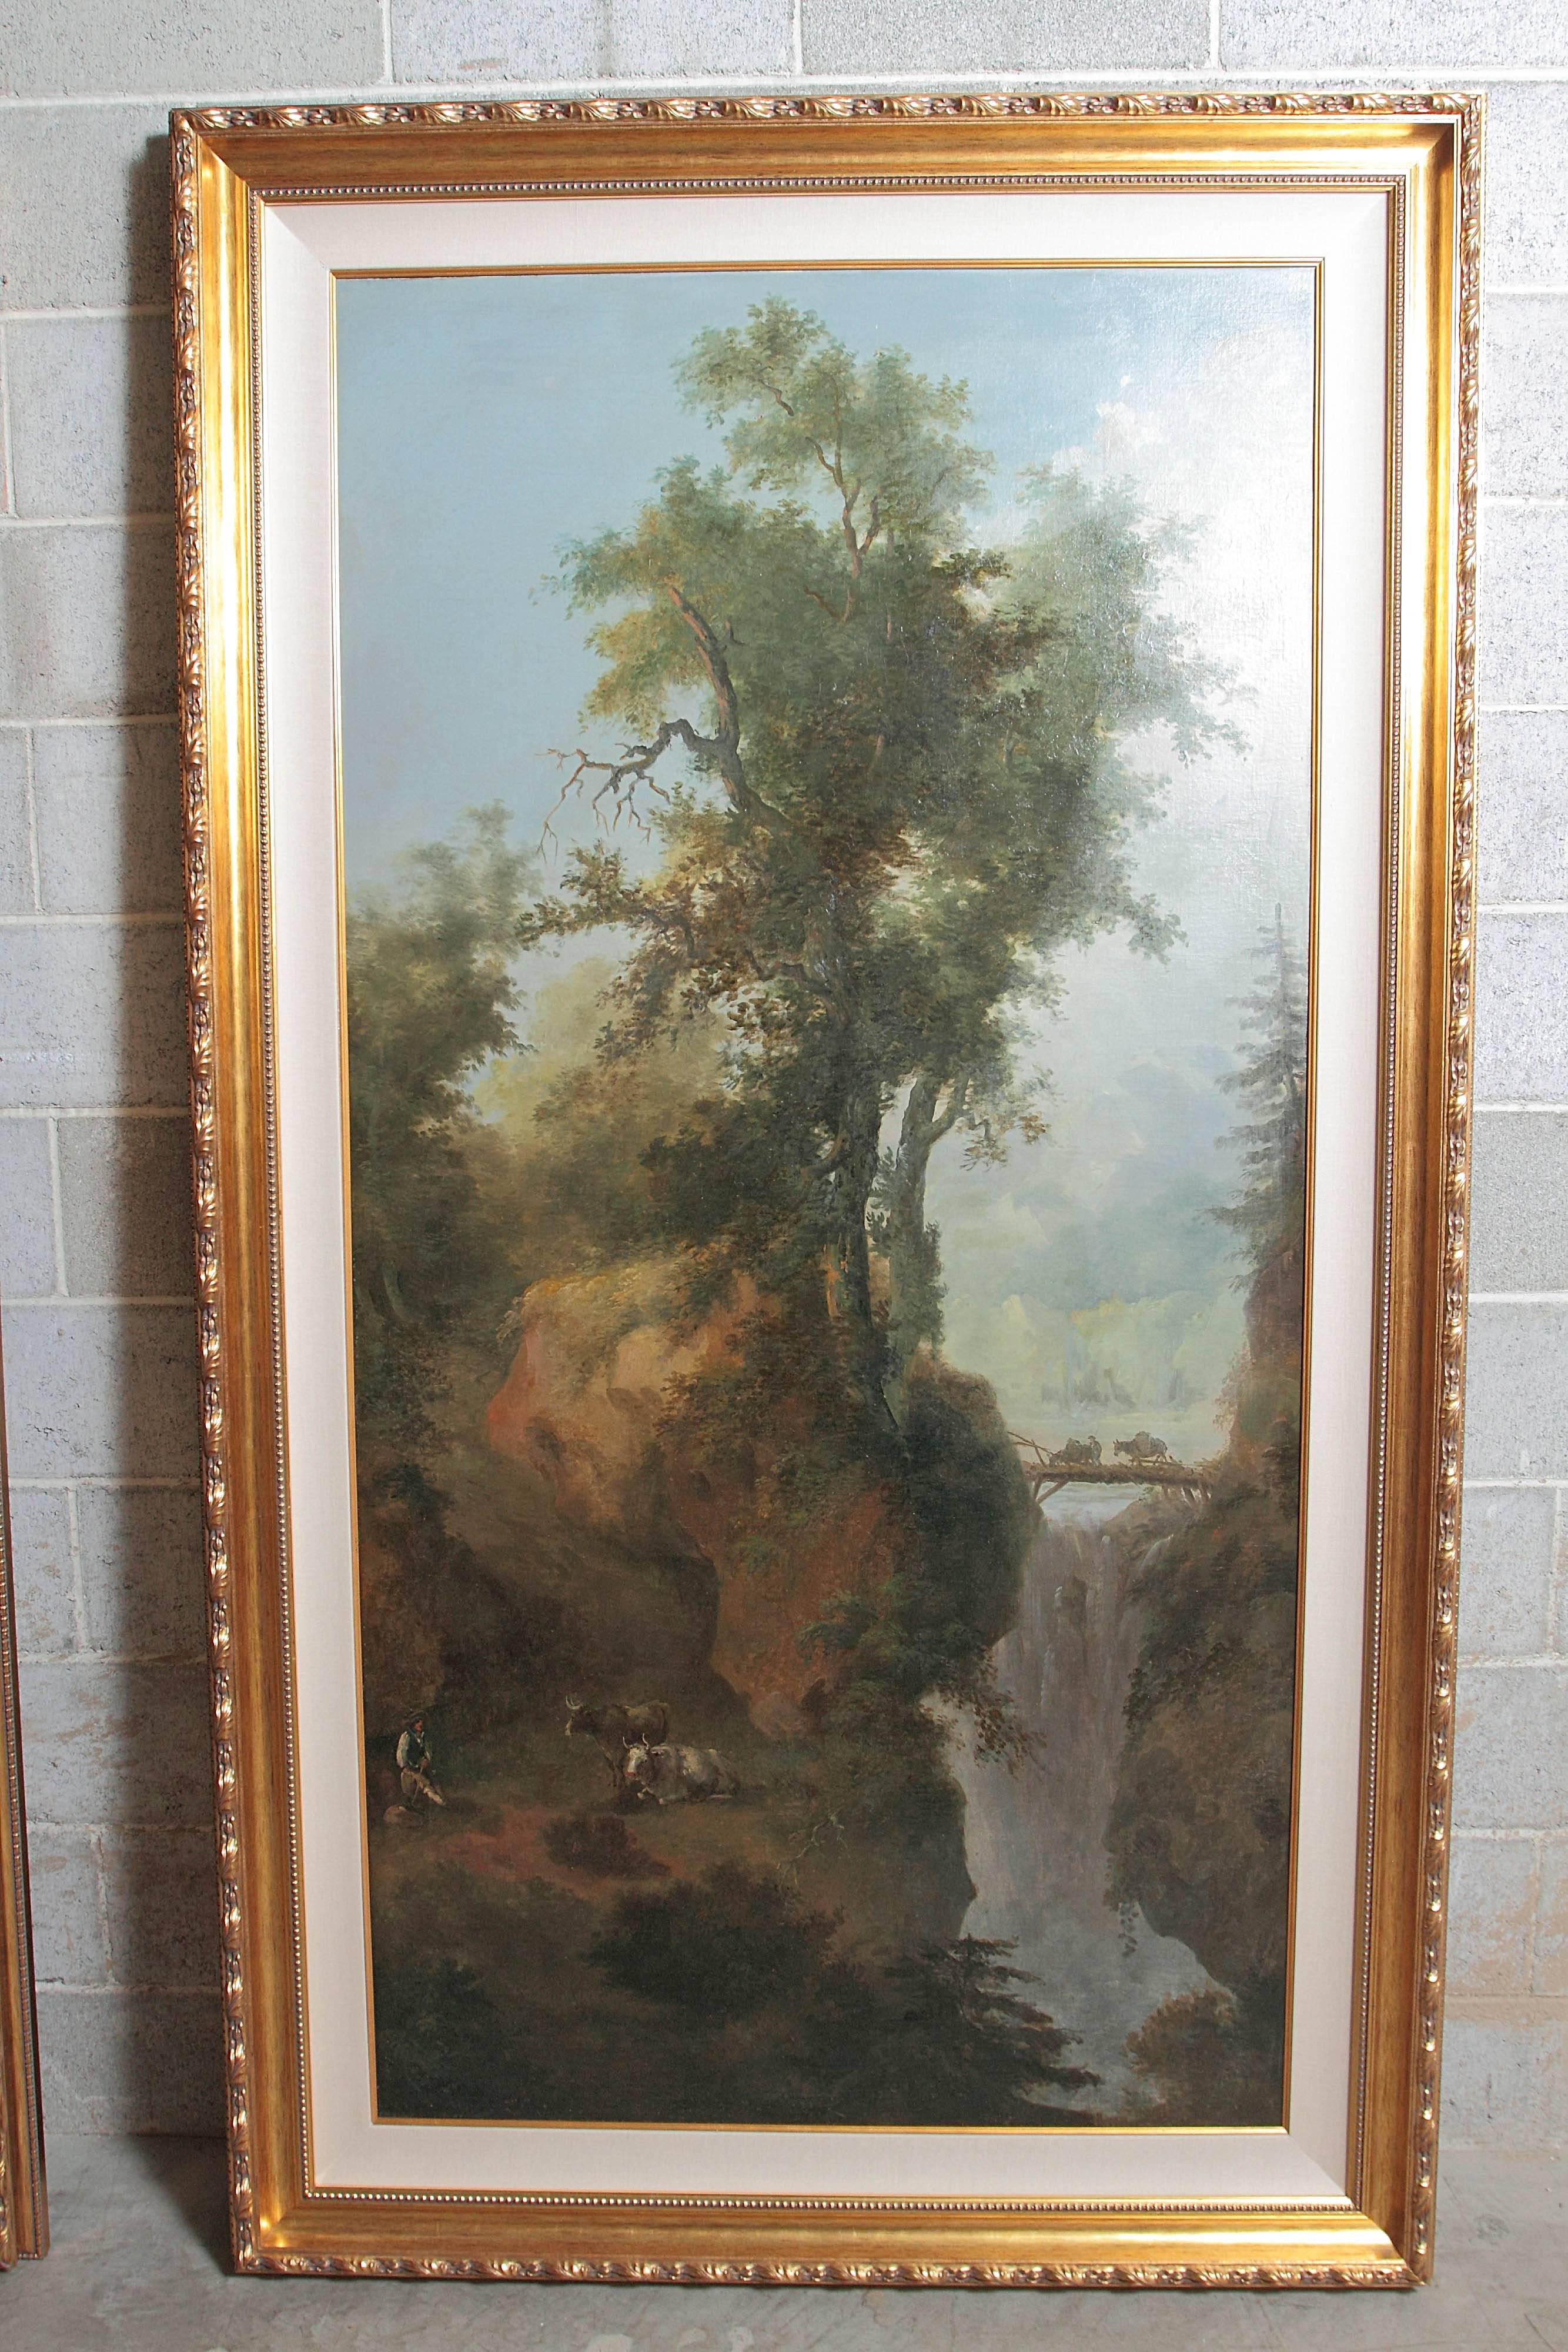 Pair of 19th century beautiful Continental large oil on canvas landscapes. Framed in a French Louis XVI gilt frame.